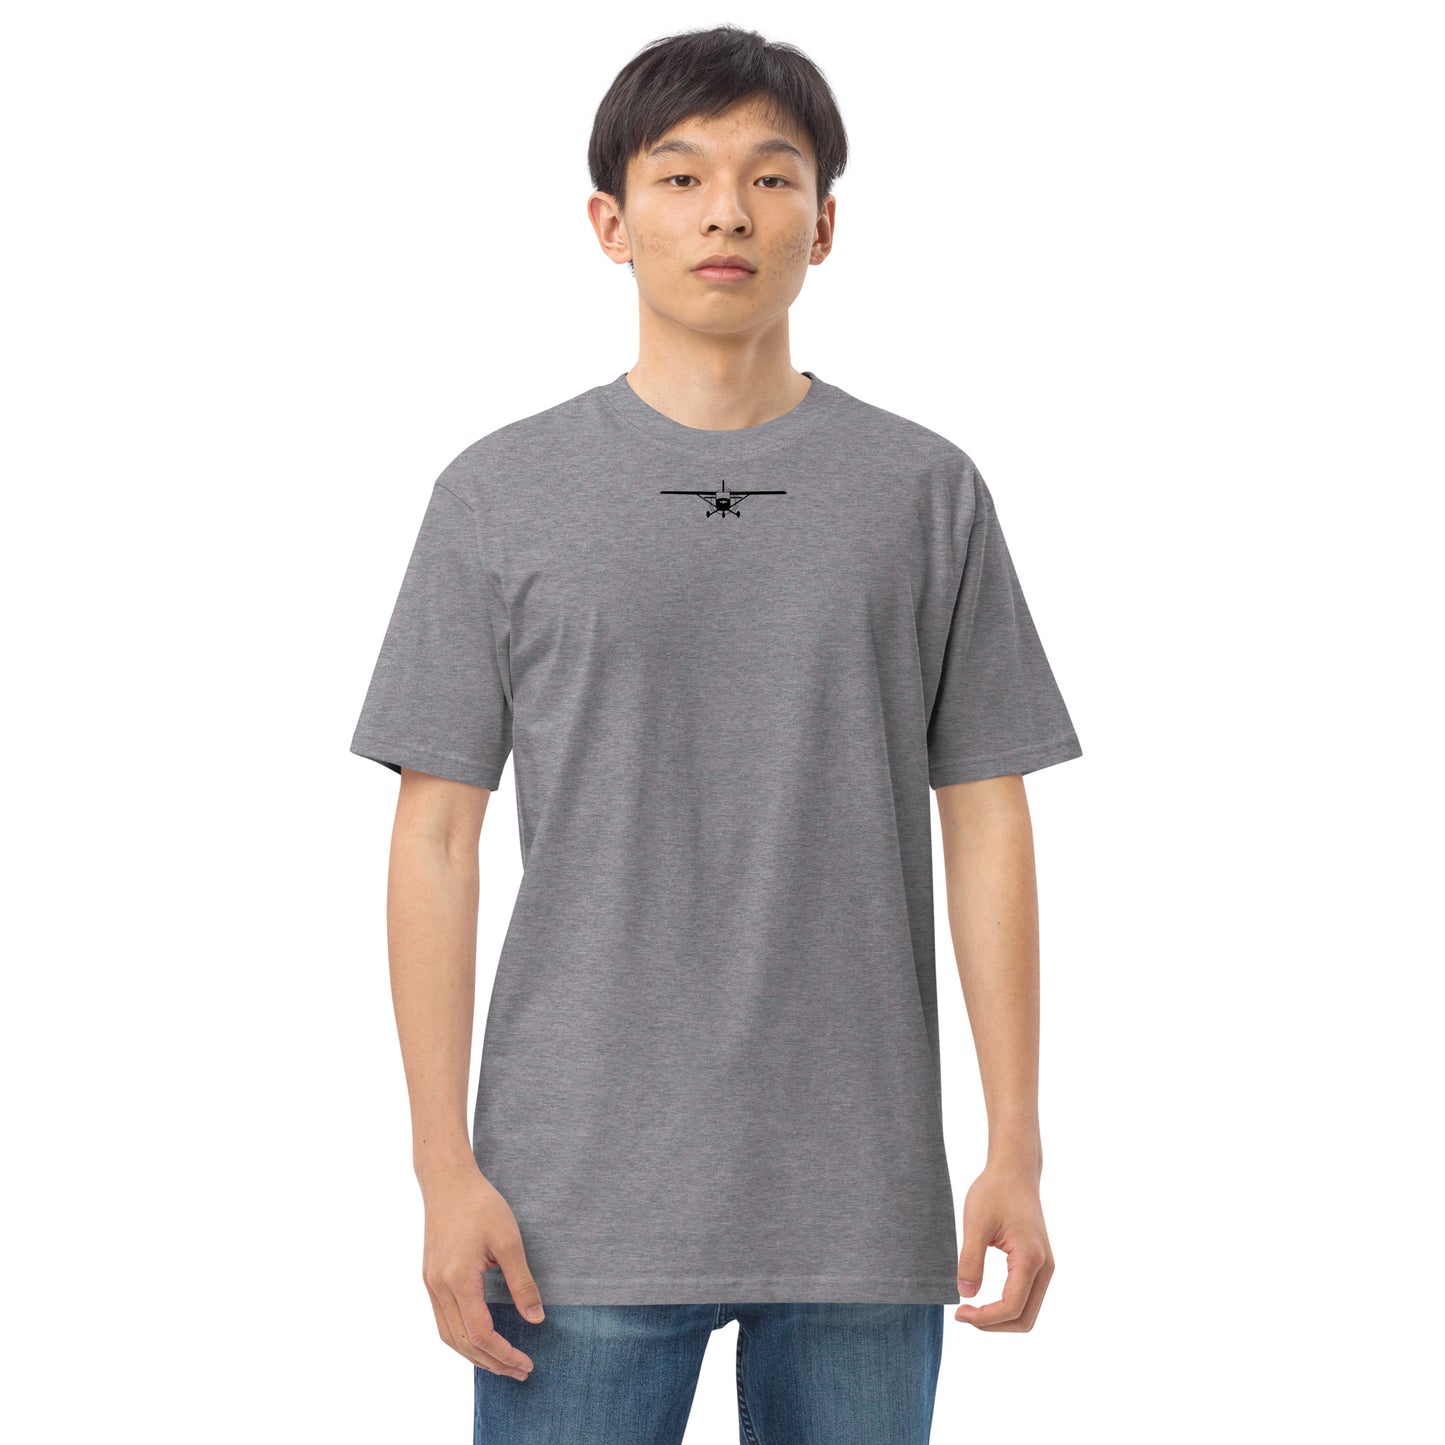 Cessna Style Front Black Silhouette T-shirt